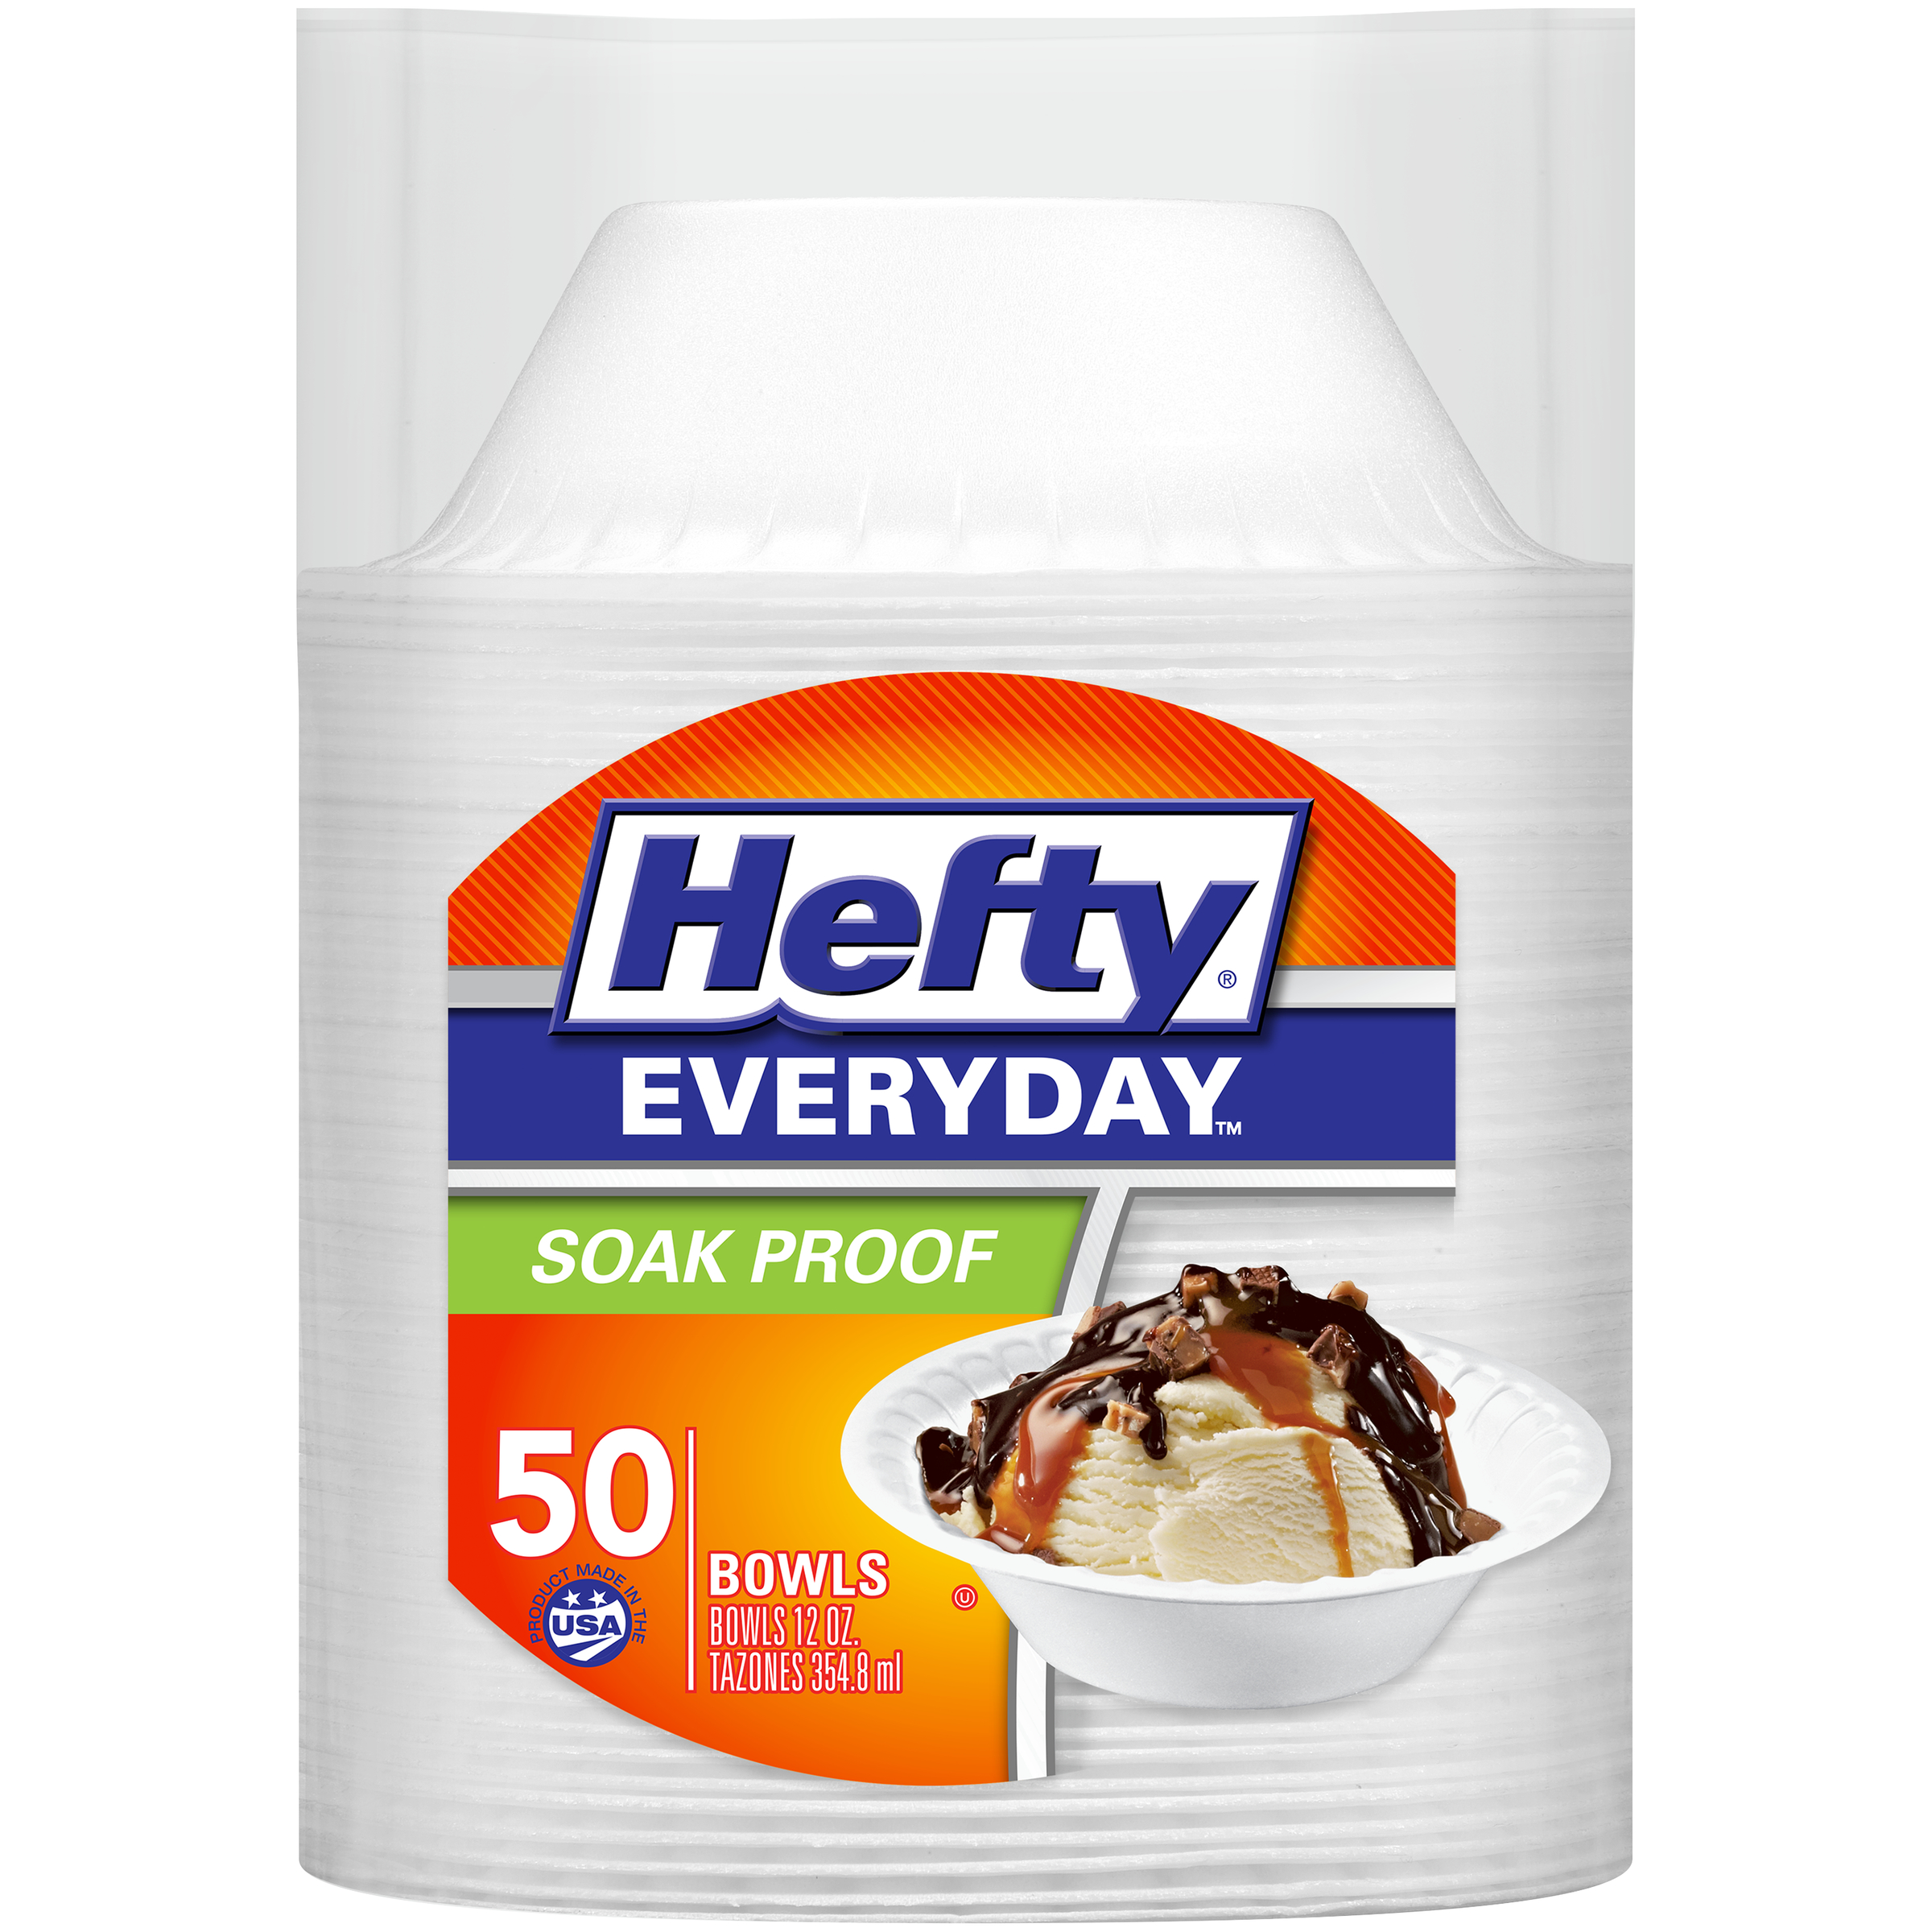 Hefty Everyday Disposable Foam Bowls, 12 oz, 50 ct - image 2 of 5